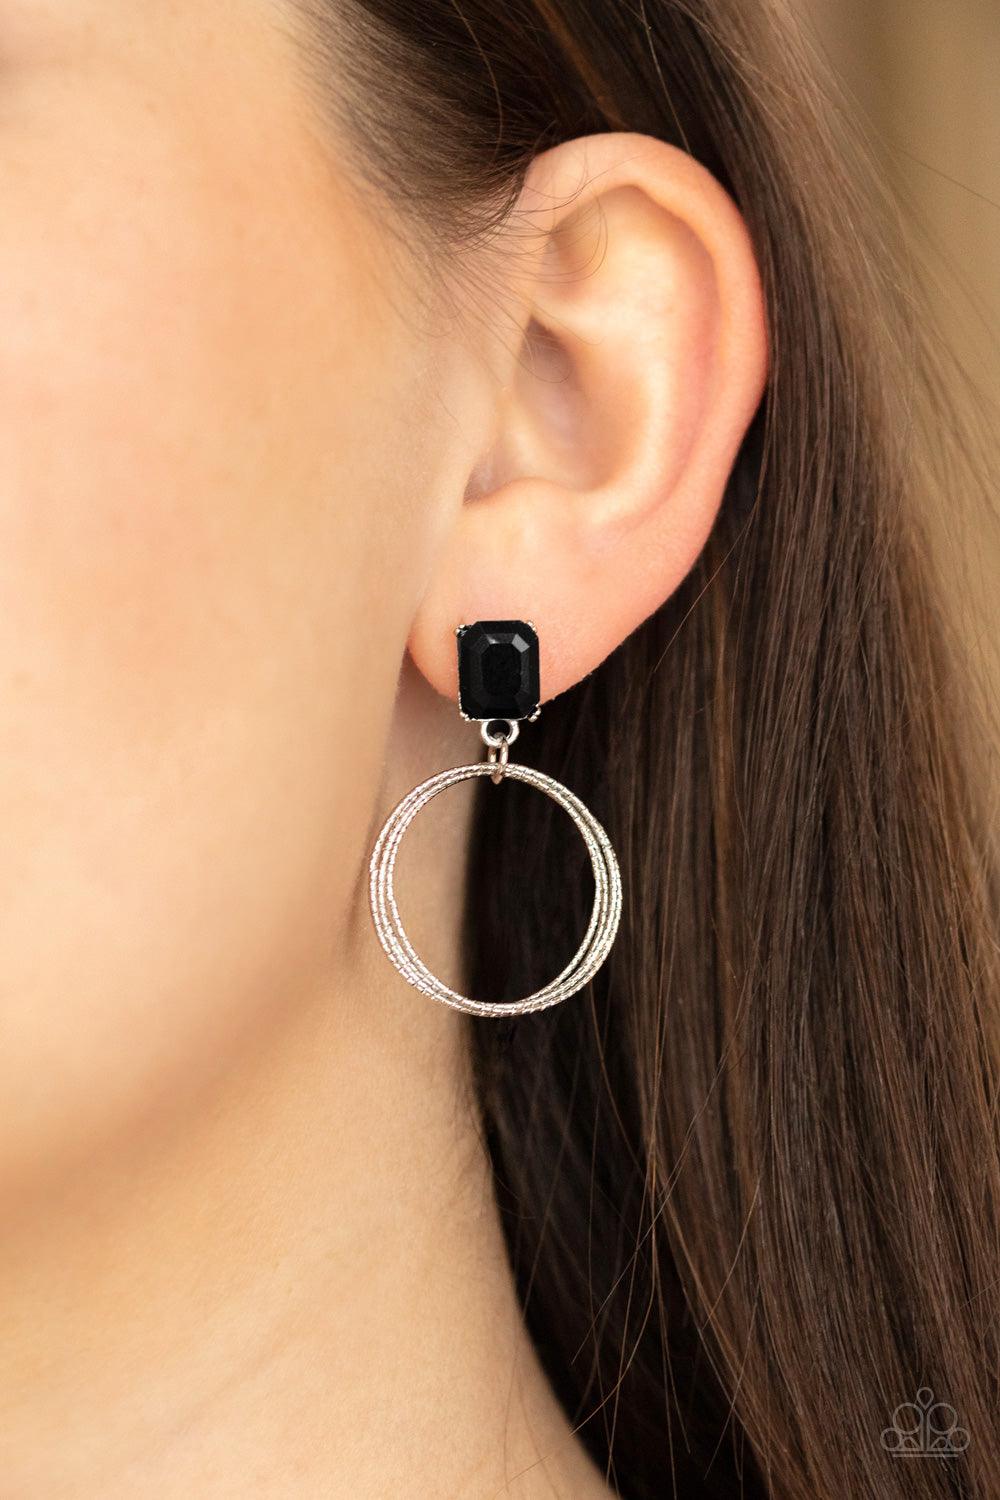 Paparazzi Accessories Prismatic Perfection - Black Encased in a pronged silver setting, a black emerald cut rhinestone links with a trio of textured silver rings, creating a romantic lure. Earring attaches to a standard post fitting. Sold as one pair of p